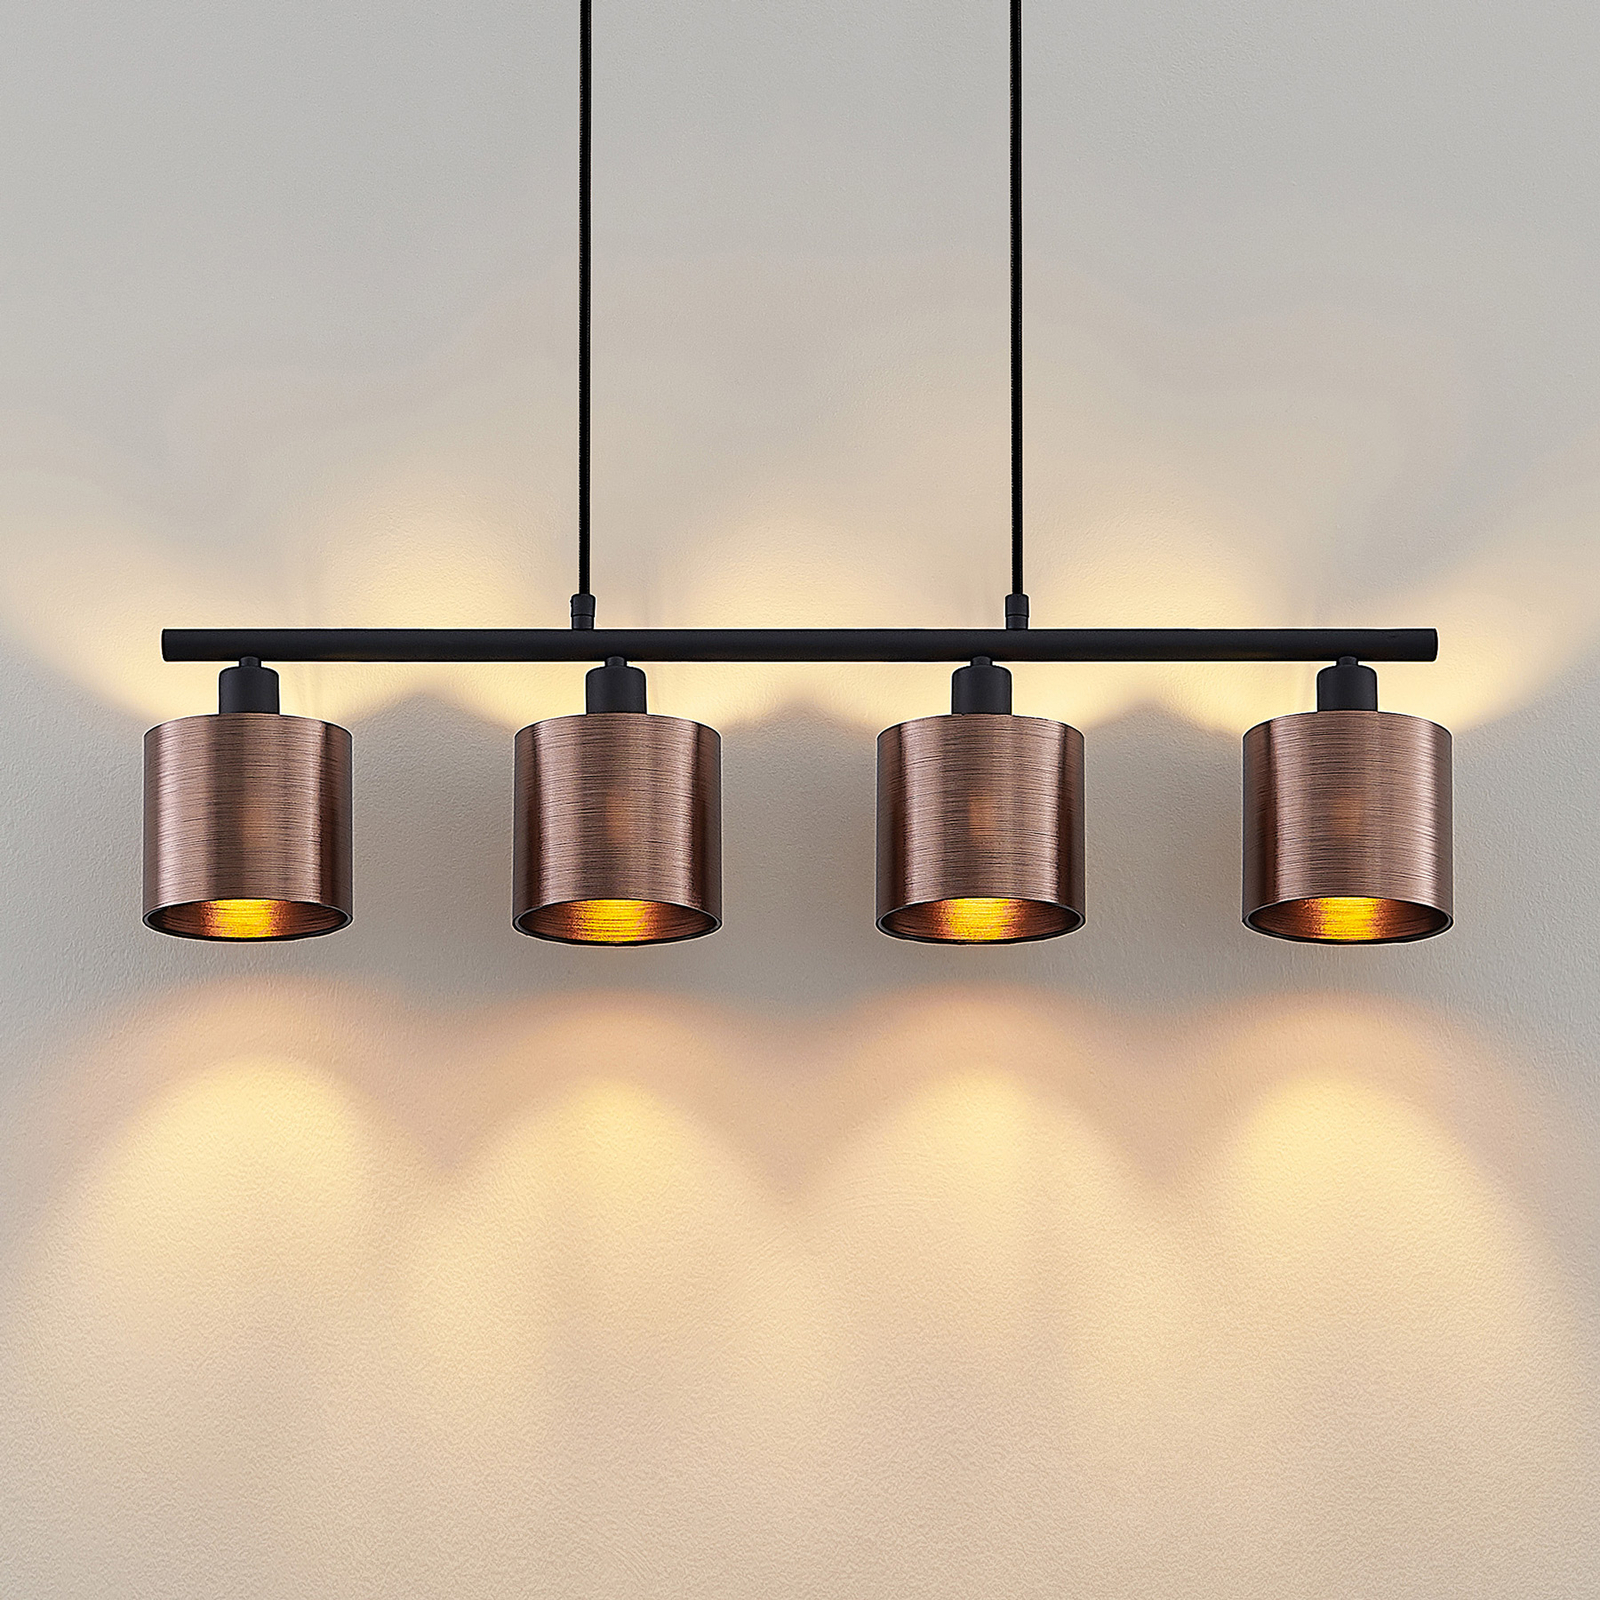 Lindby Joudy colgante, 4 luces, bronce oscuro